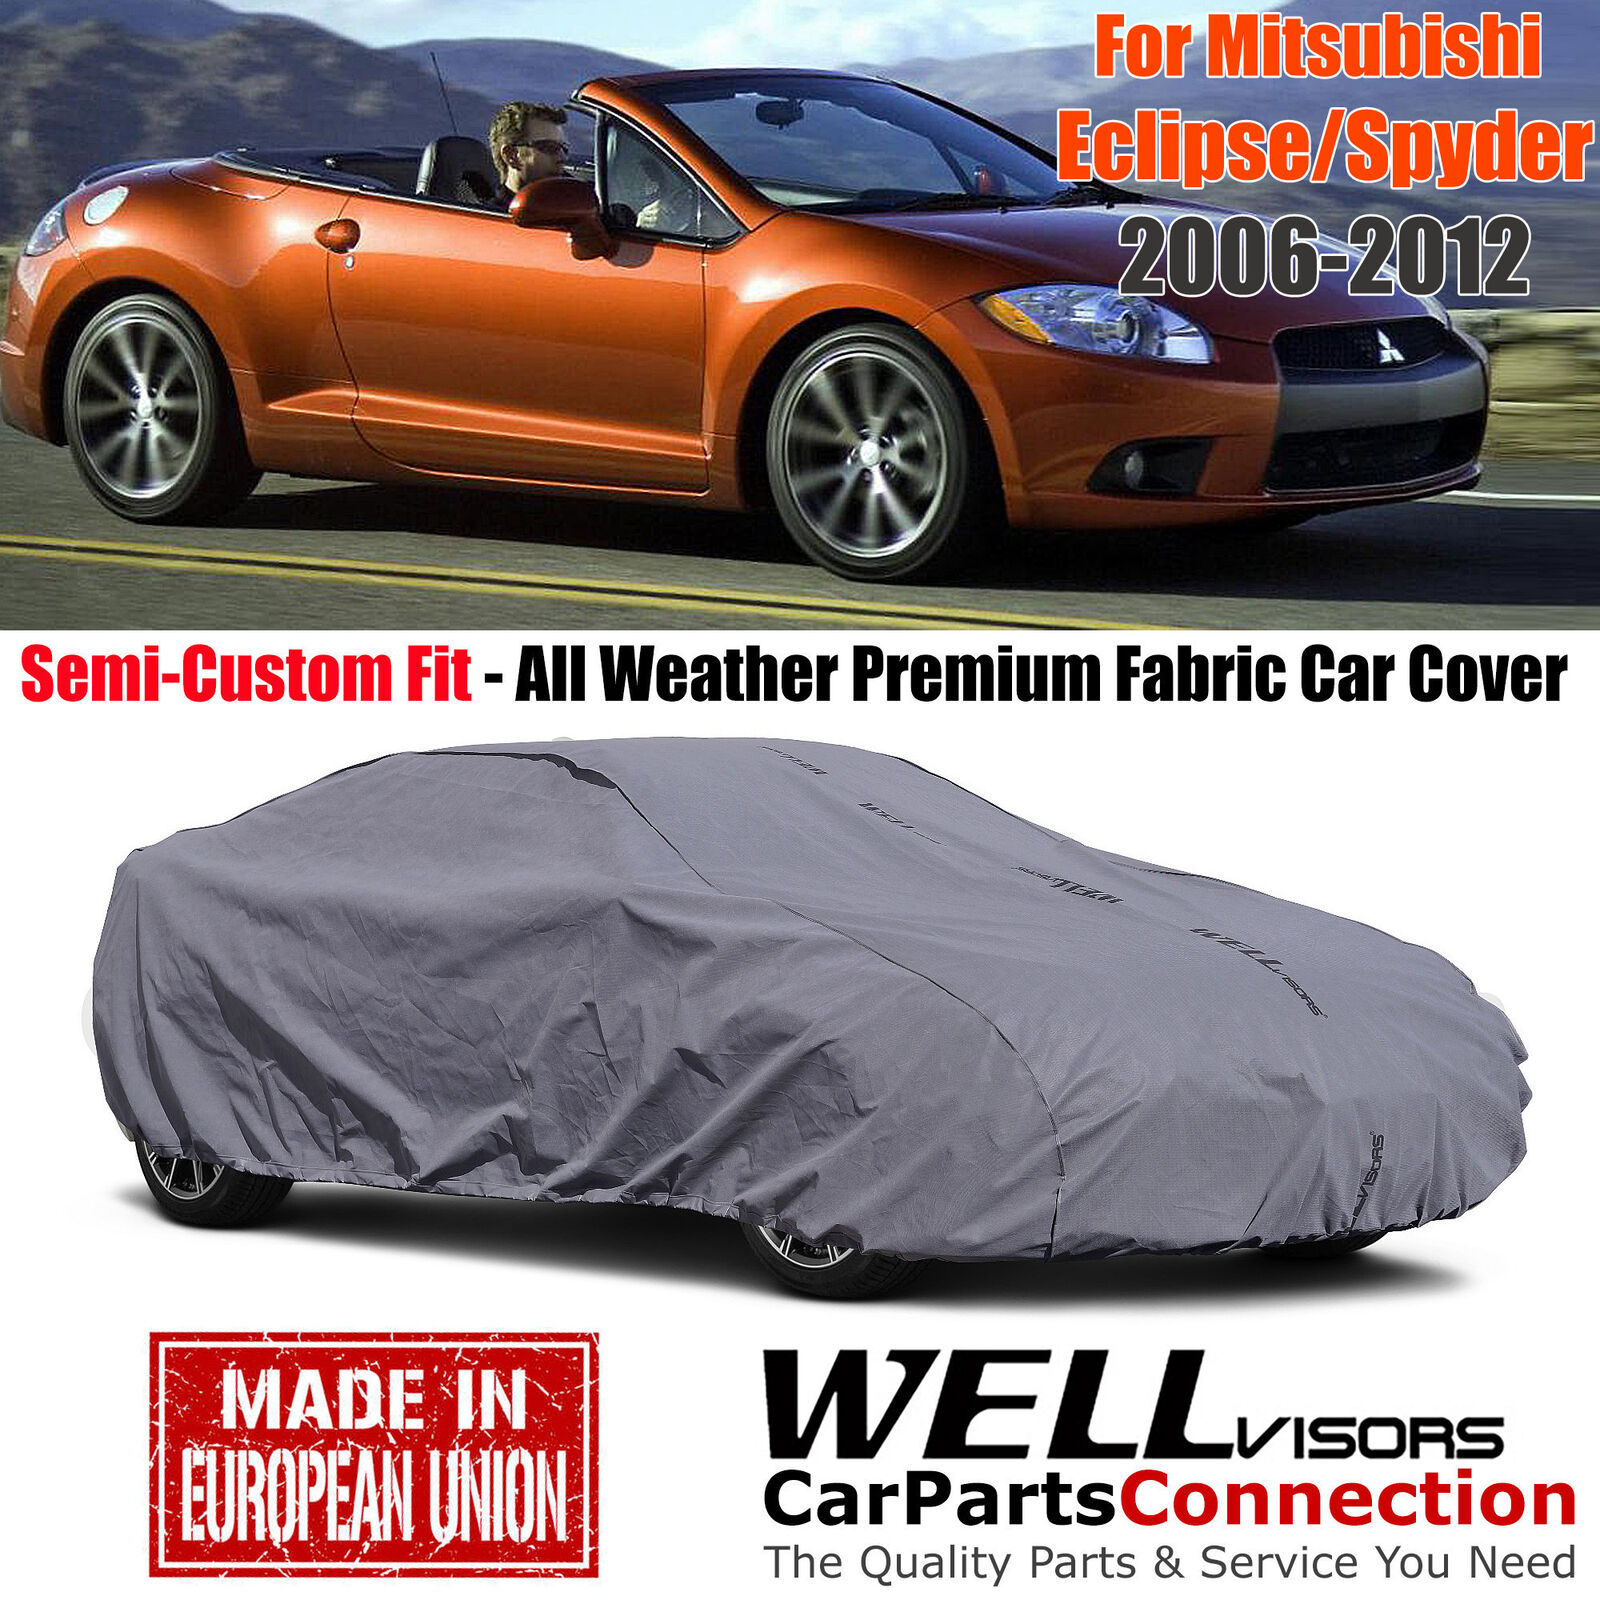 WellVisors All Weather Car Cover For 2006-2012 Mitsubishi Eclipse Spyder